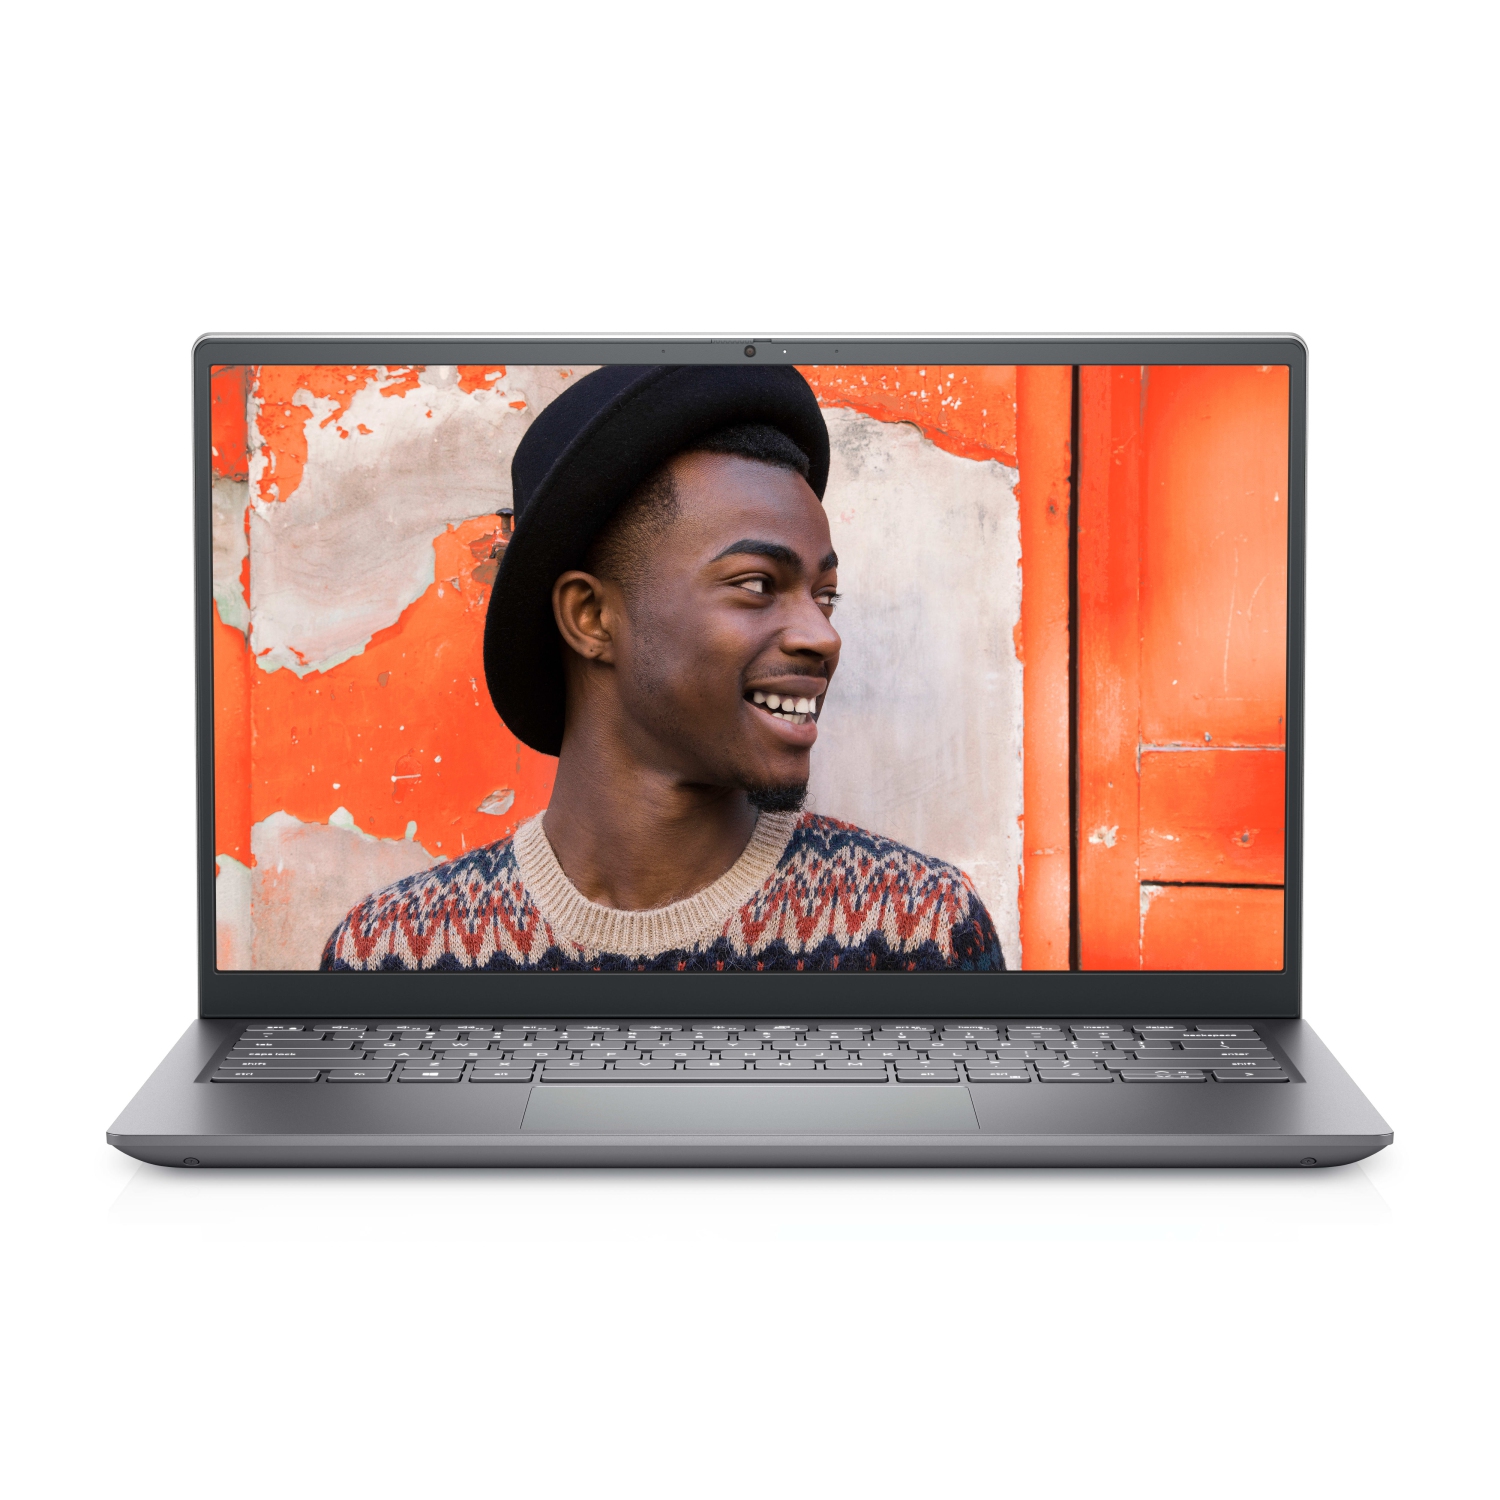 Refurbished (Excellent) – Dell Inspiron 5410 Laptop (2021) | 14" FHD | Core i5 - 512GB SSD - 12GB RAM | 4 Cores @ 4.4 GHz - 11th Gen CPU